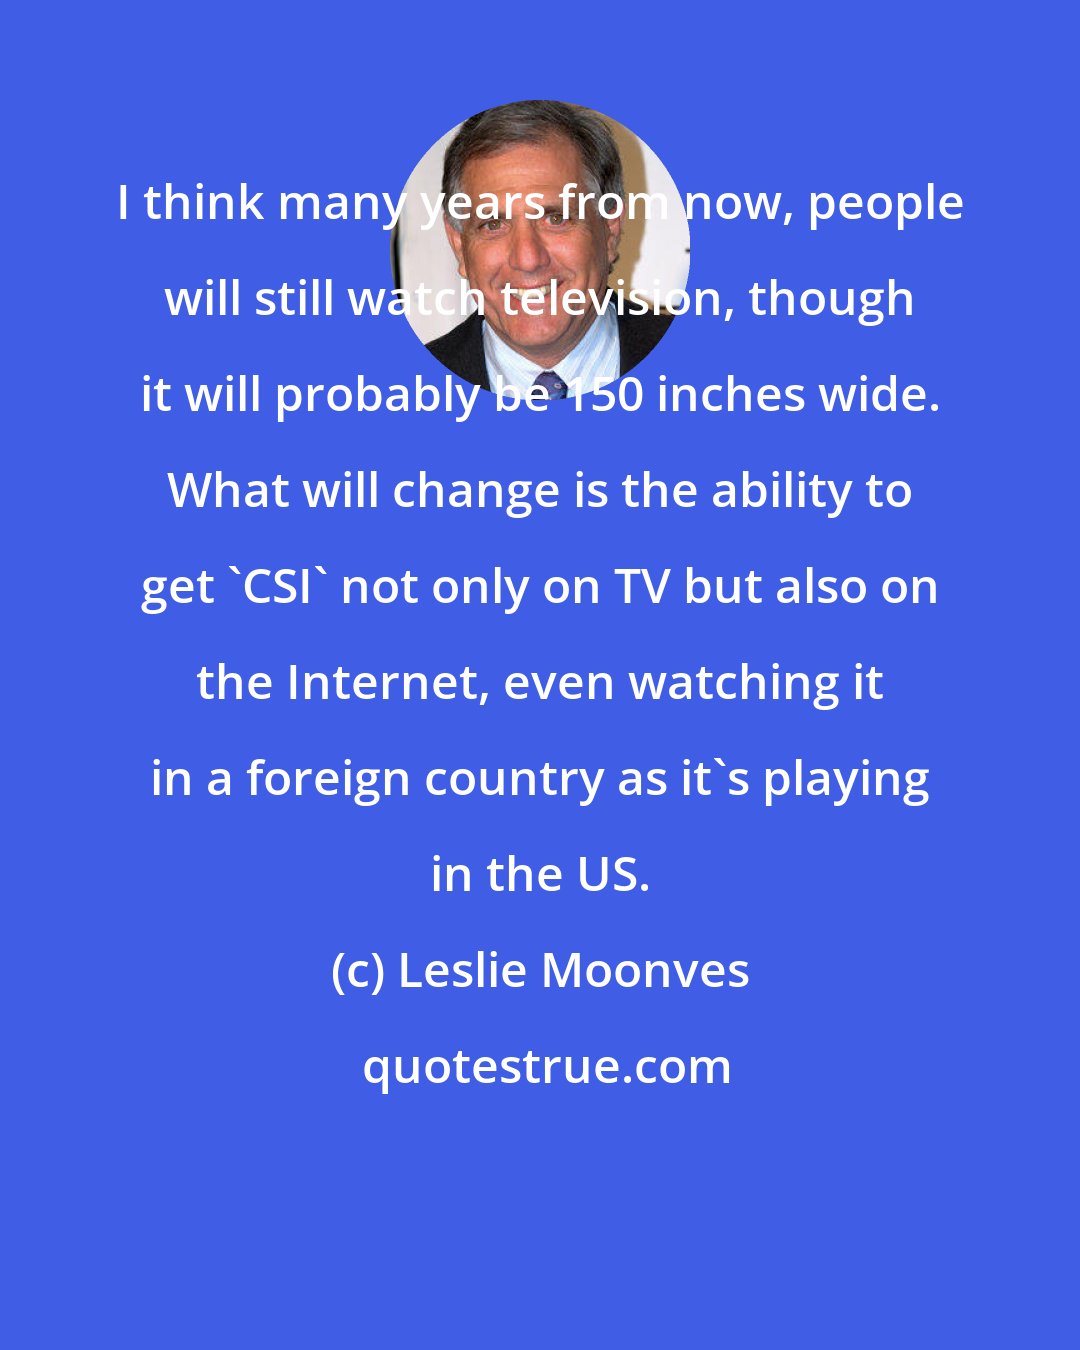 Leslie Moonves: I think many years from now, people will still watch television, though it will probably be 150 inches wide. What will change is the ability to get 'CSI' not only on TV but also on the Internet, even watching it in a foreign country as it's playing in the US.